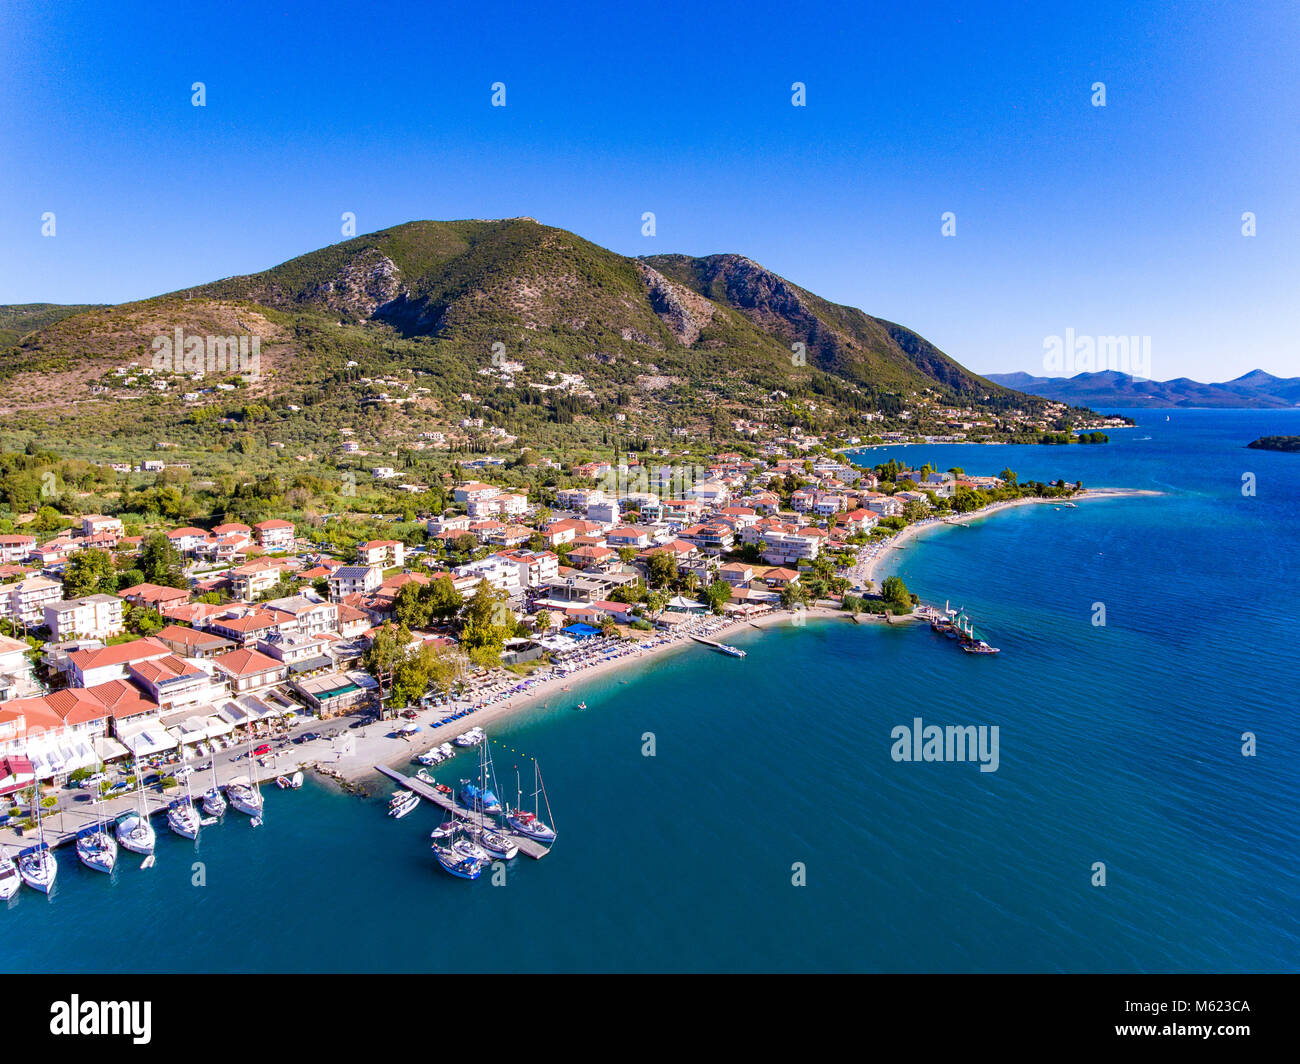 Nidri town in Lefkada  Island Greece, the second biggest city and tourist destination on the island. Aerial view Stock Photo